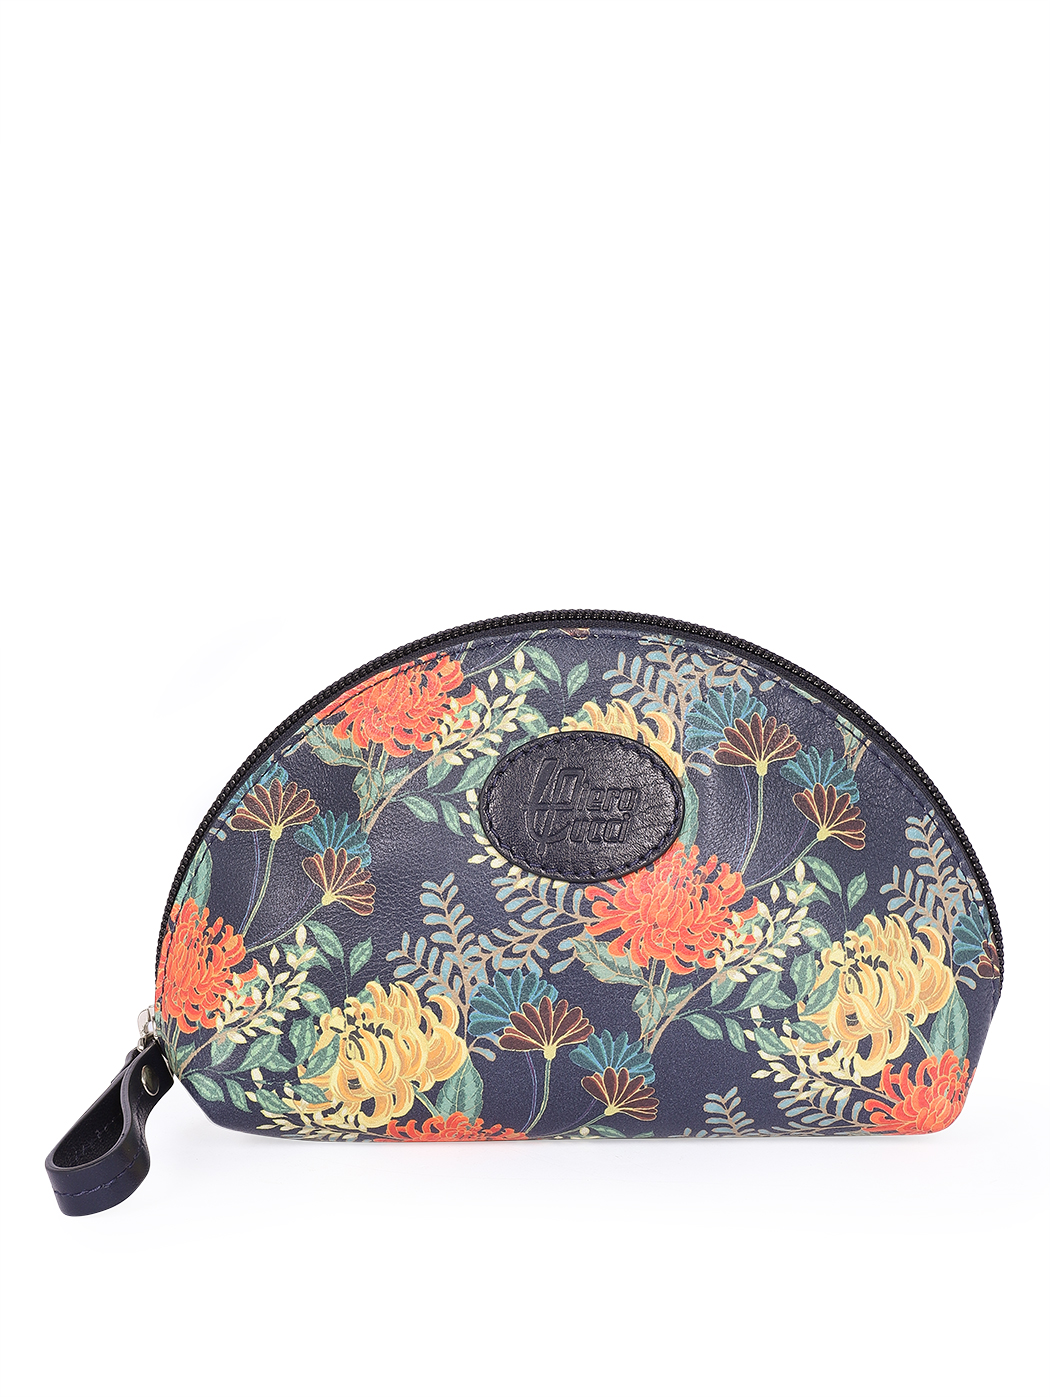 Large Clamshell Cosmetic Case - Floré Navy blue